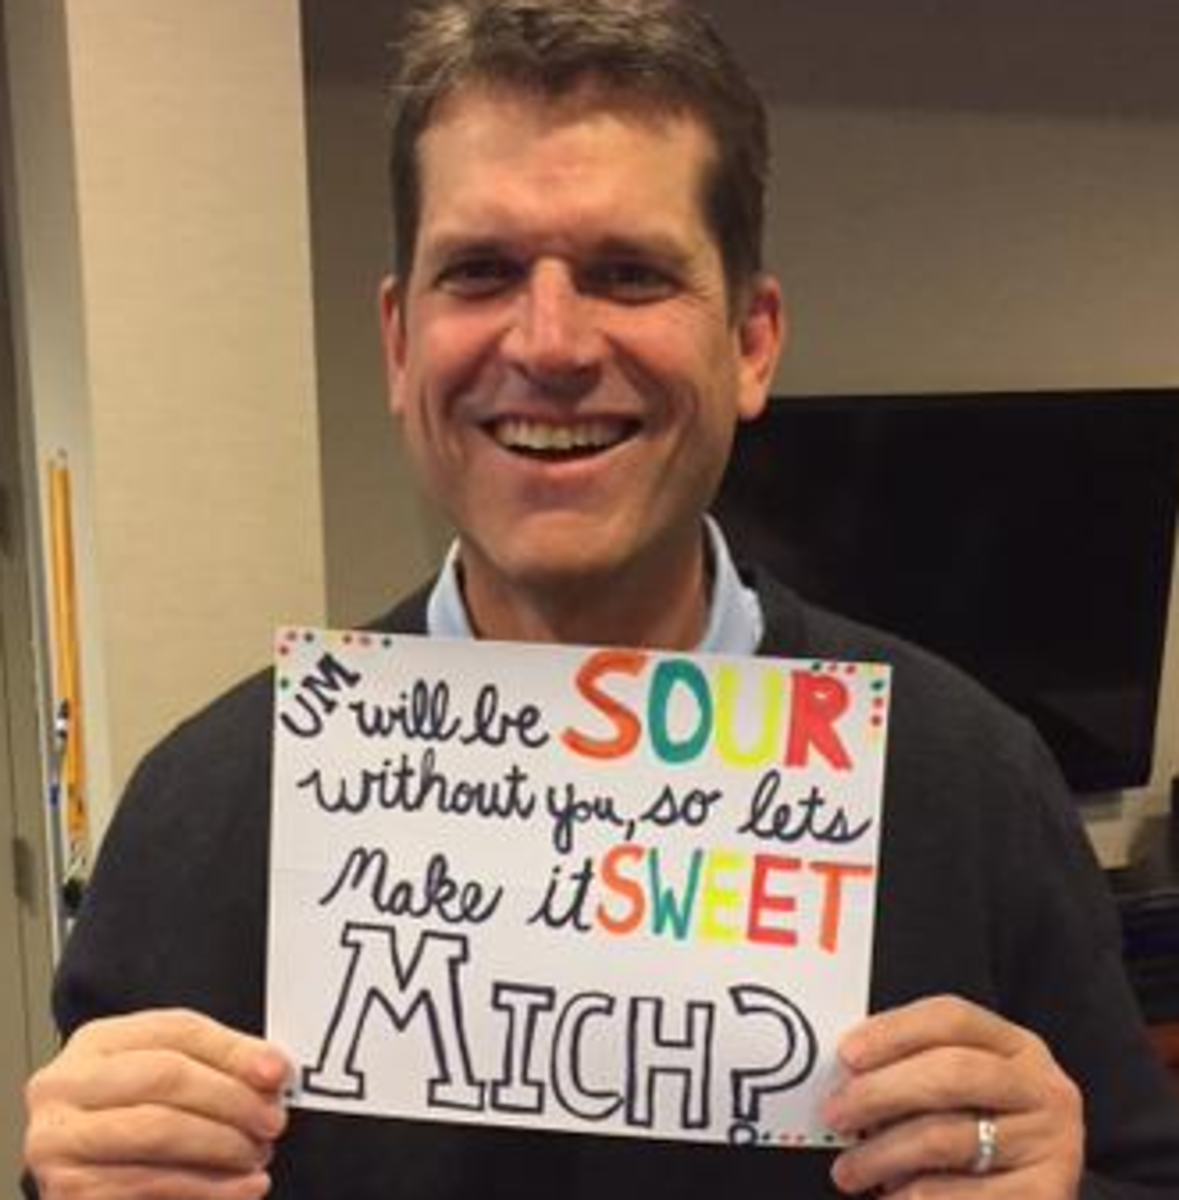 Jim Harbaugh with a weird sign.